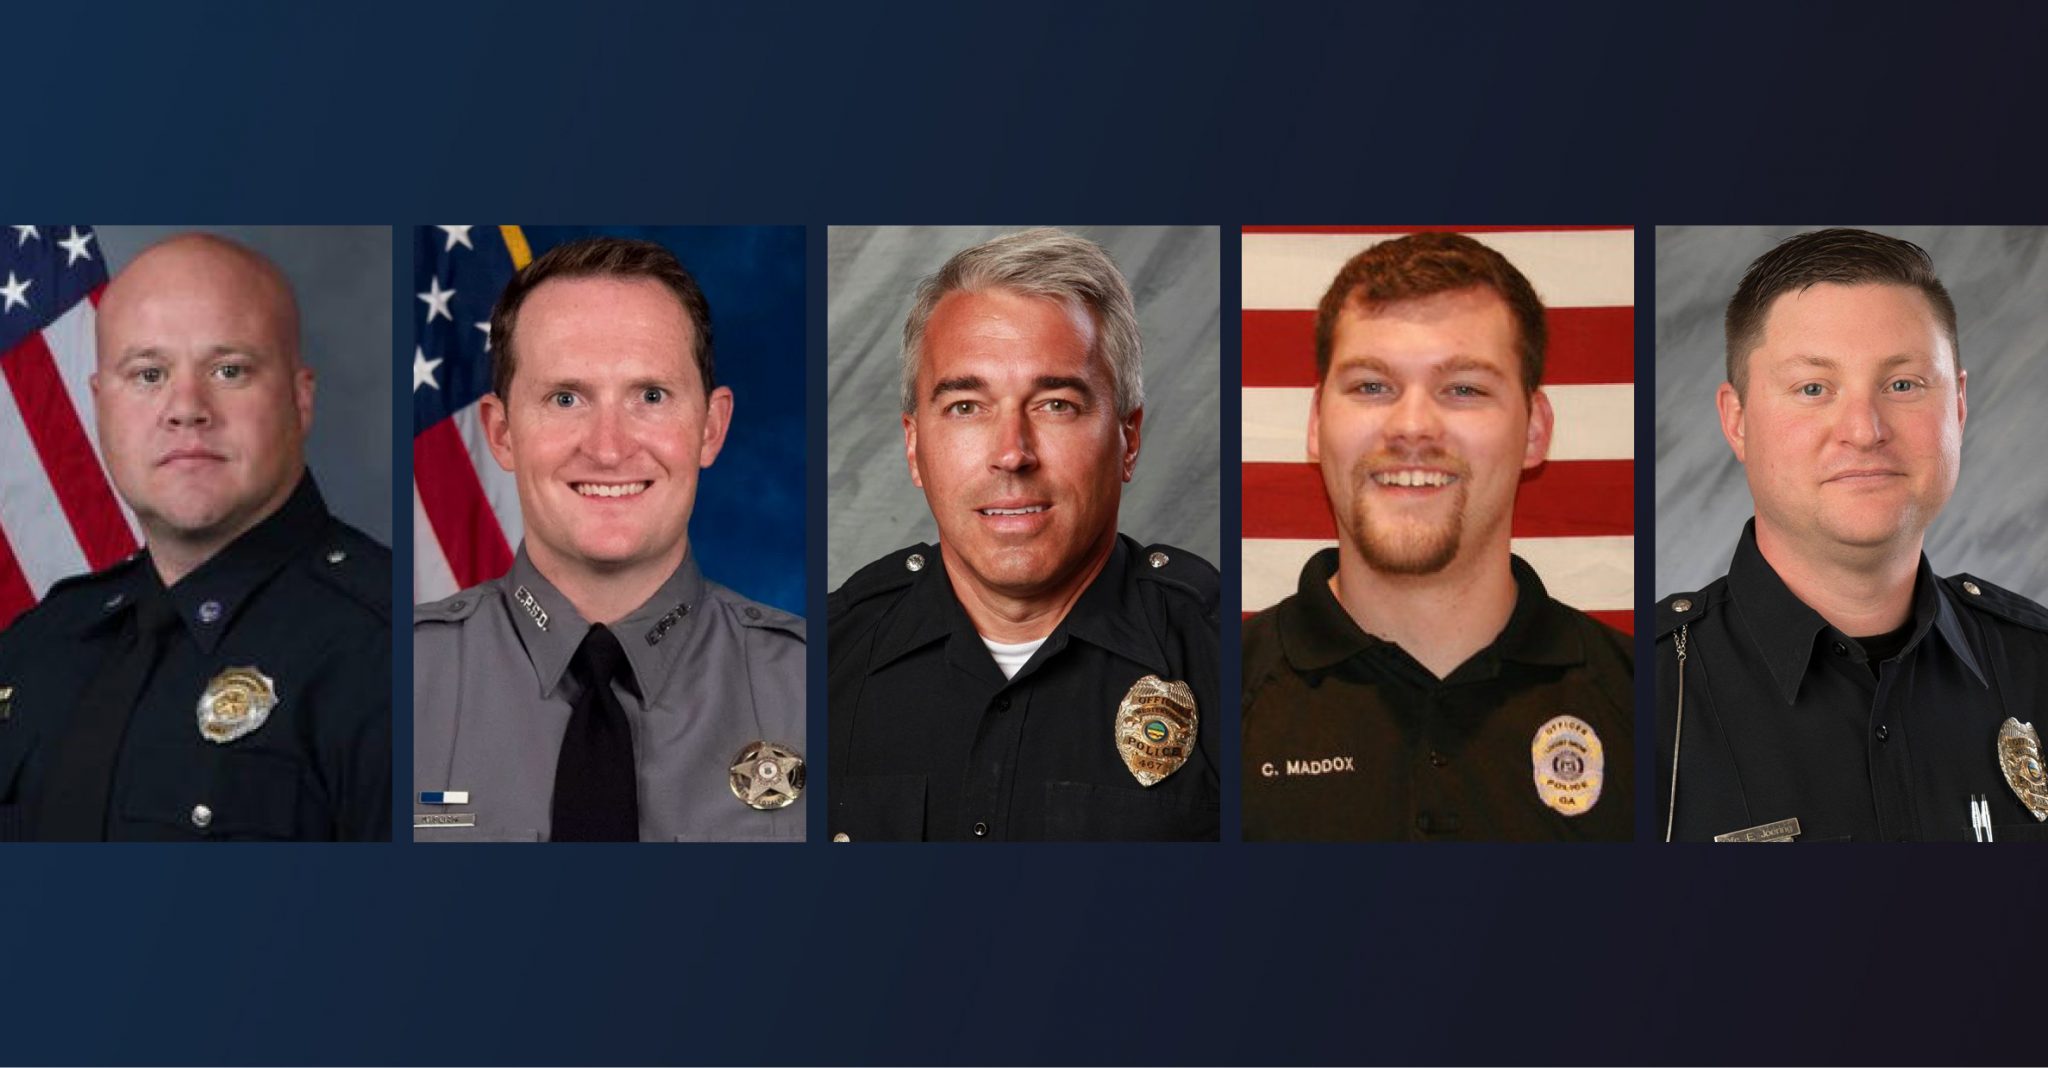 Bulletin Five U.S. Law Enforcement Officers Were Shot and Killed in